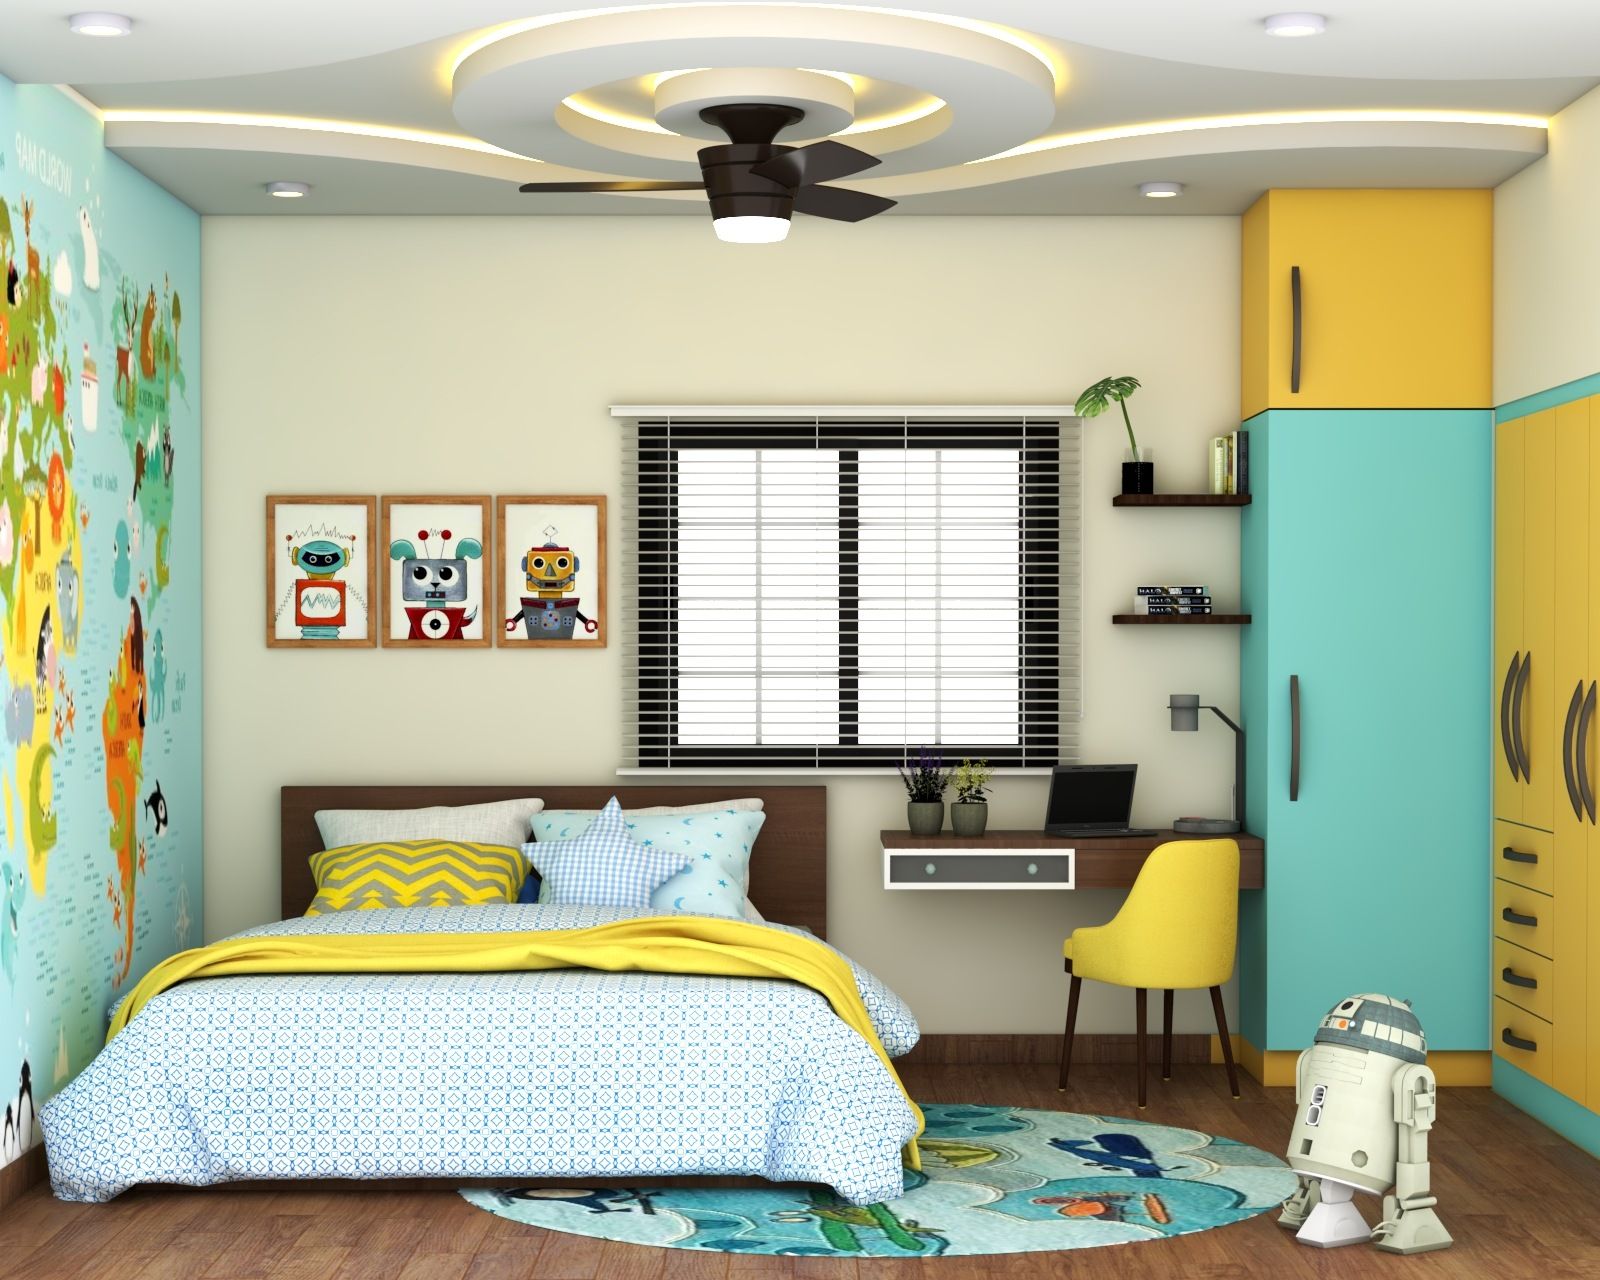 Contemporary Kids Room With A Wooden Queen Size Bed And Open Wall Shelves